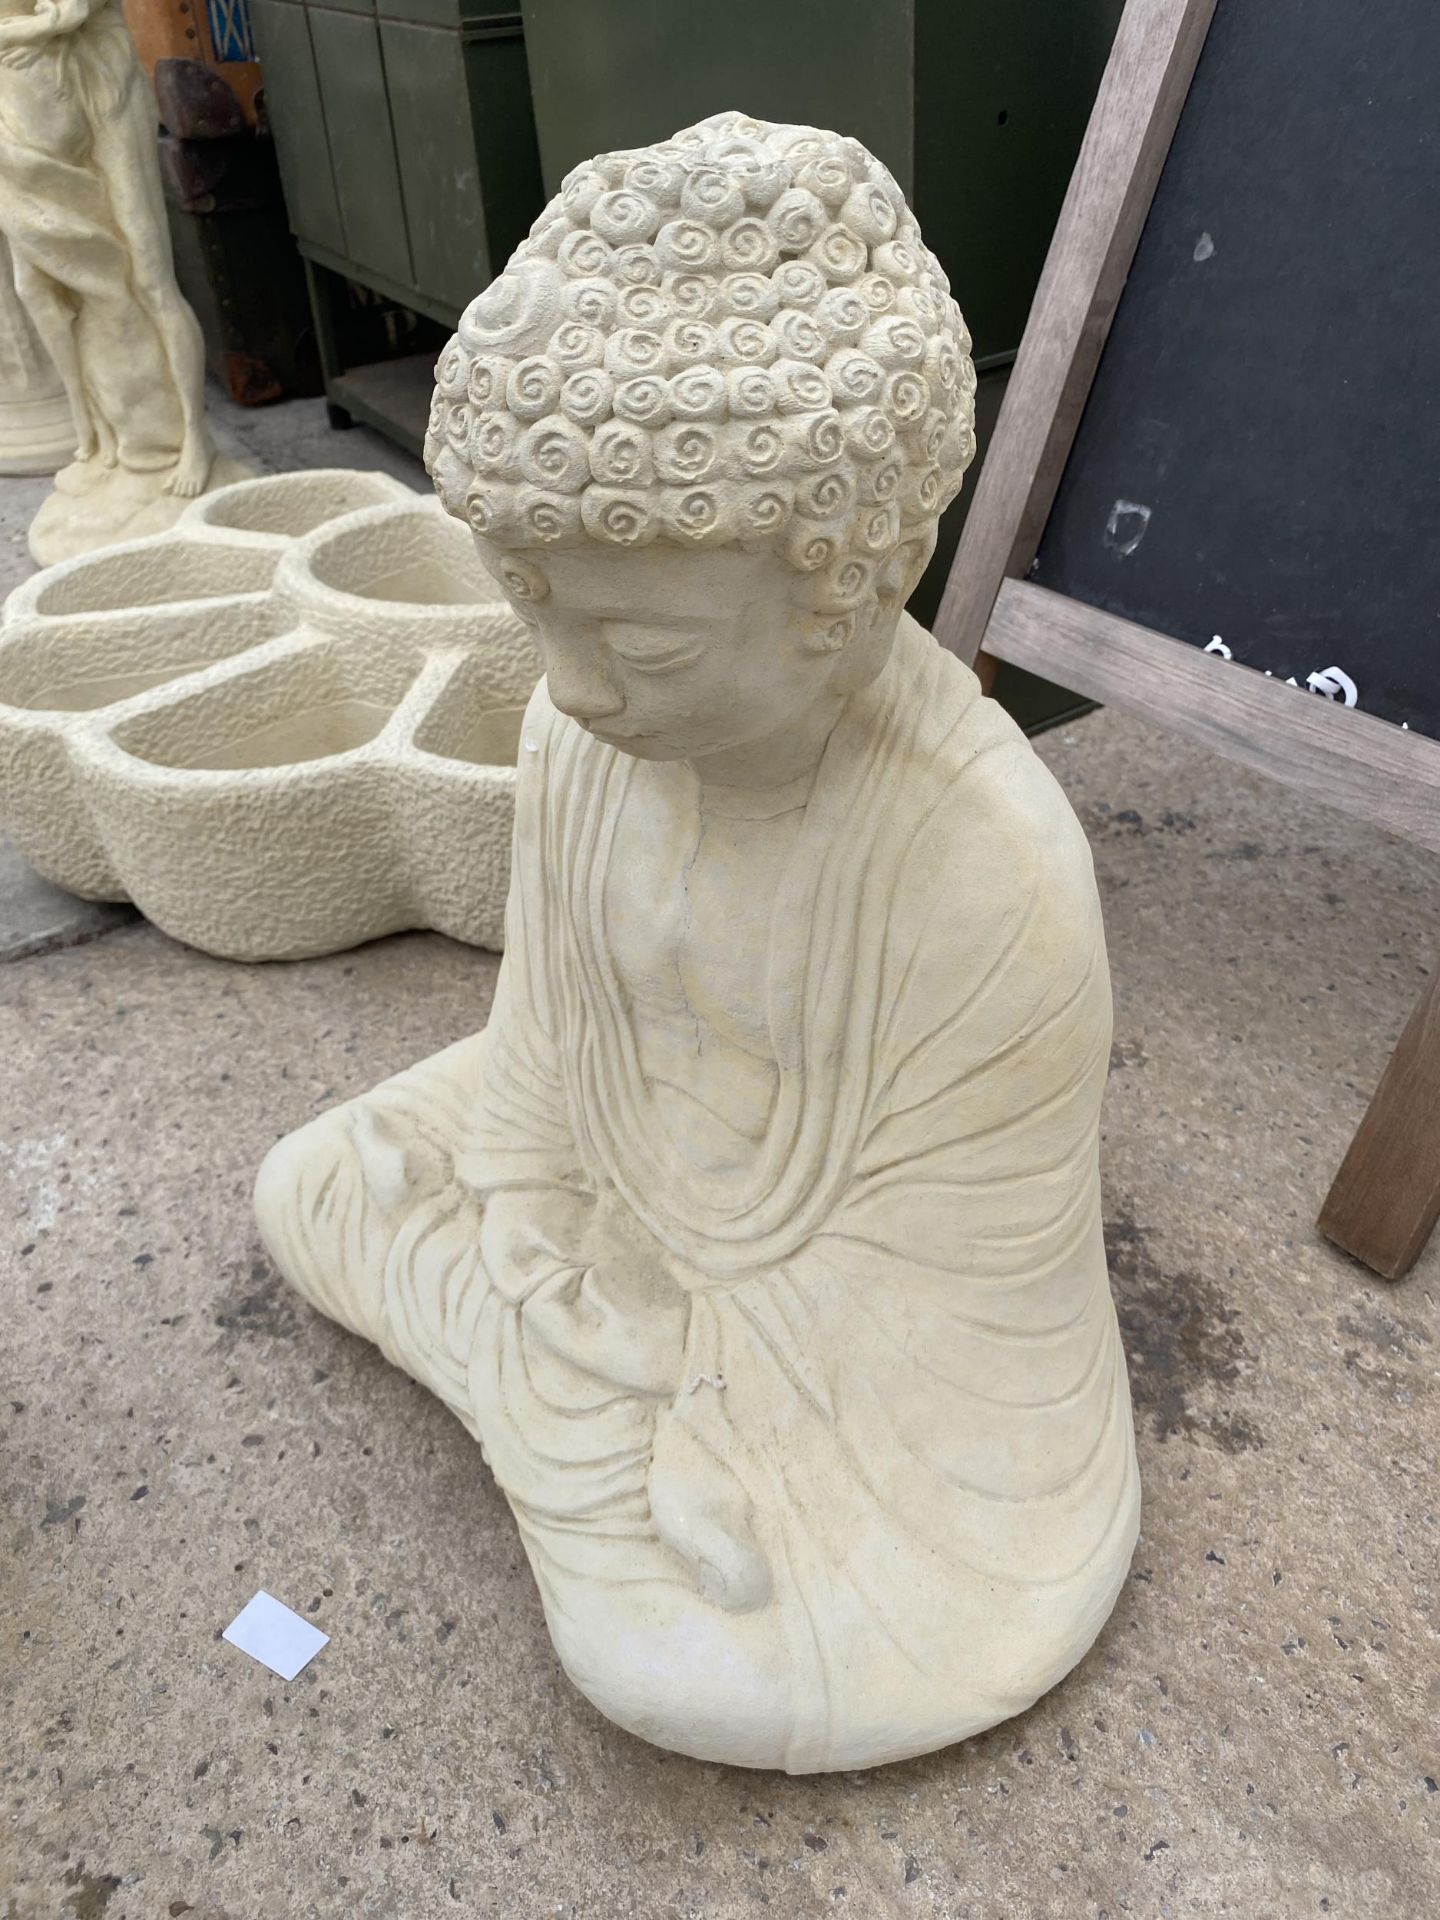 AN AS NEW EX DISPLAY CONCRETE BUDDAH FIGURE *PLEASE NOTE VAT TO BE PAID ON THIS ITEM* - Image 3 of 4